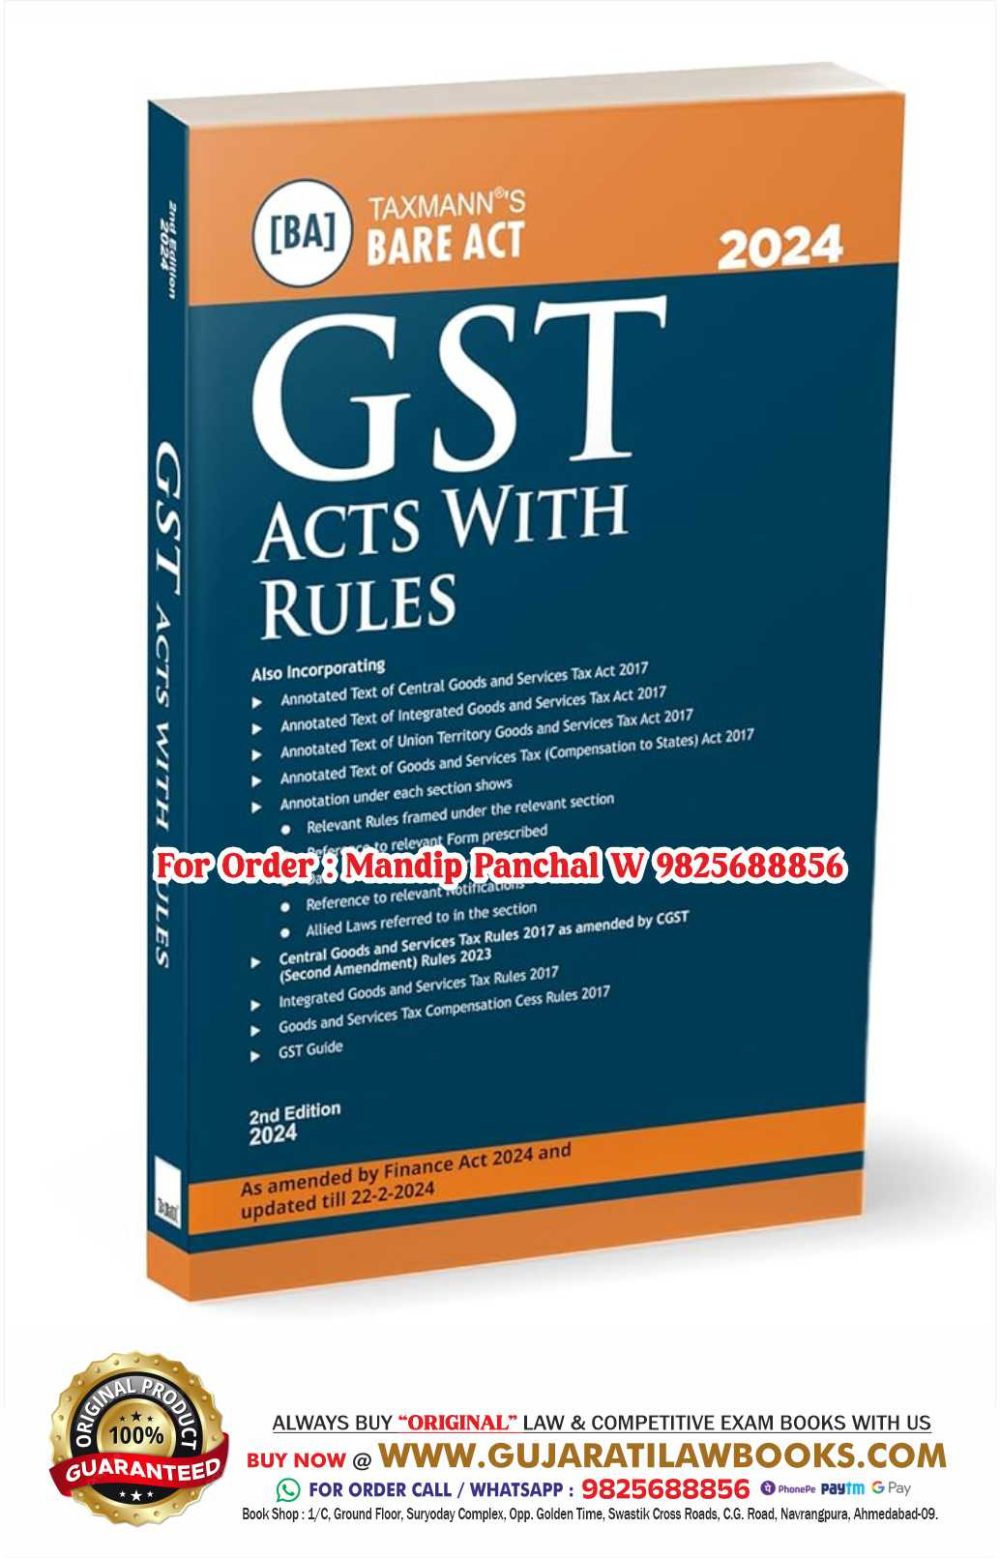 Taxmann's GST Acts with Rules - BARE ACT - Latest 2nd Edition 2024